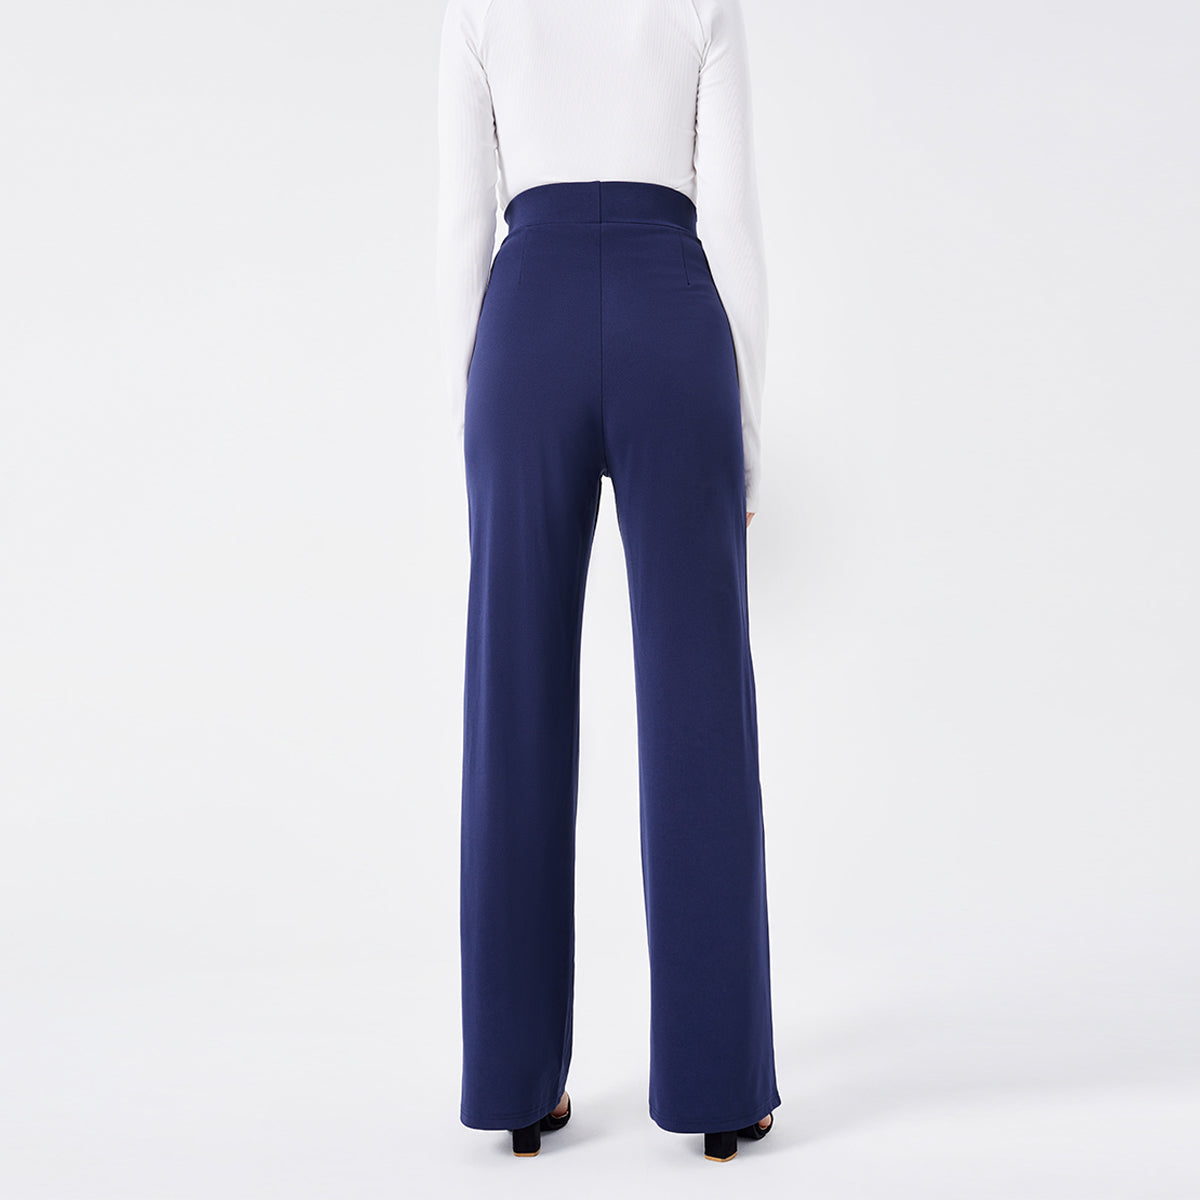 Chic Flare Pants